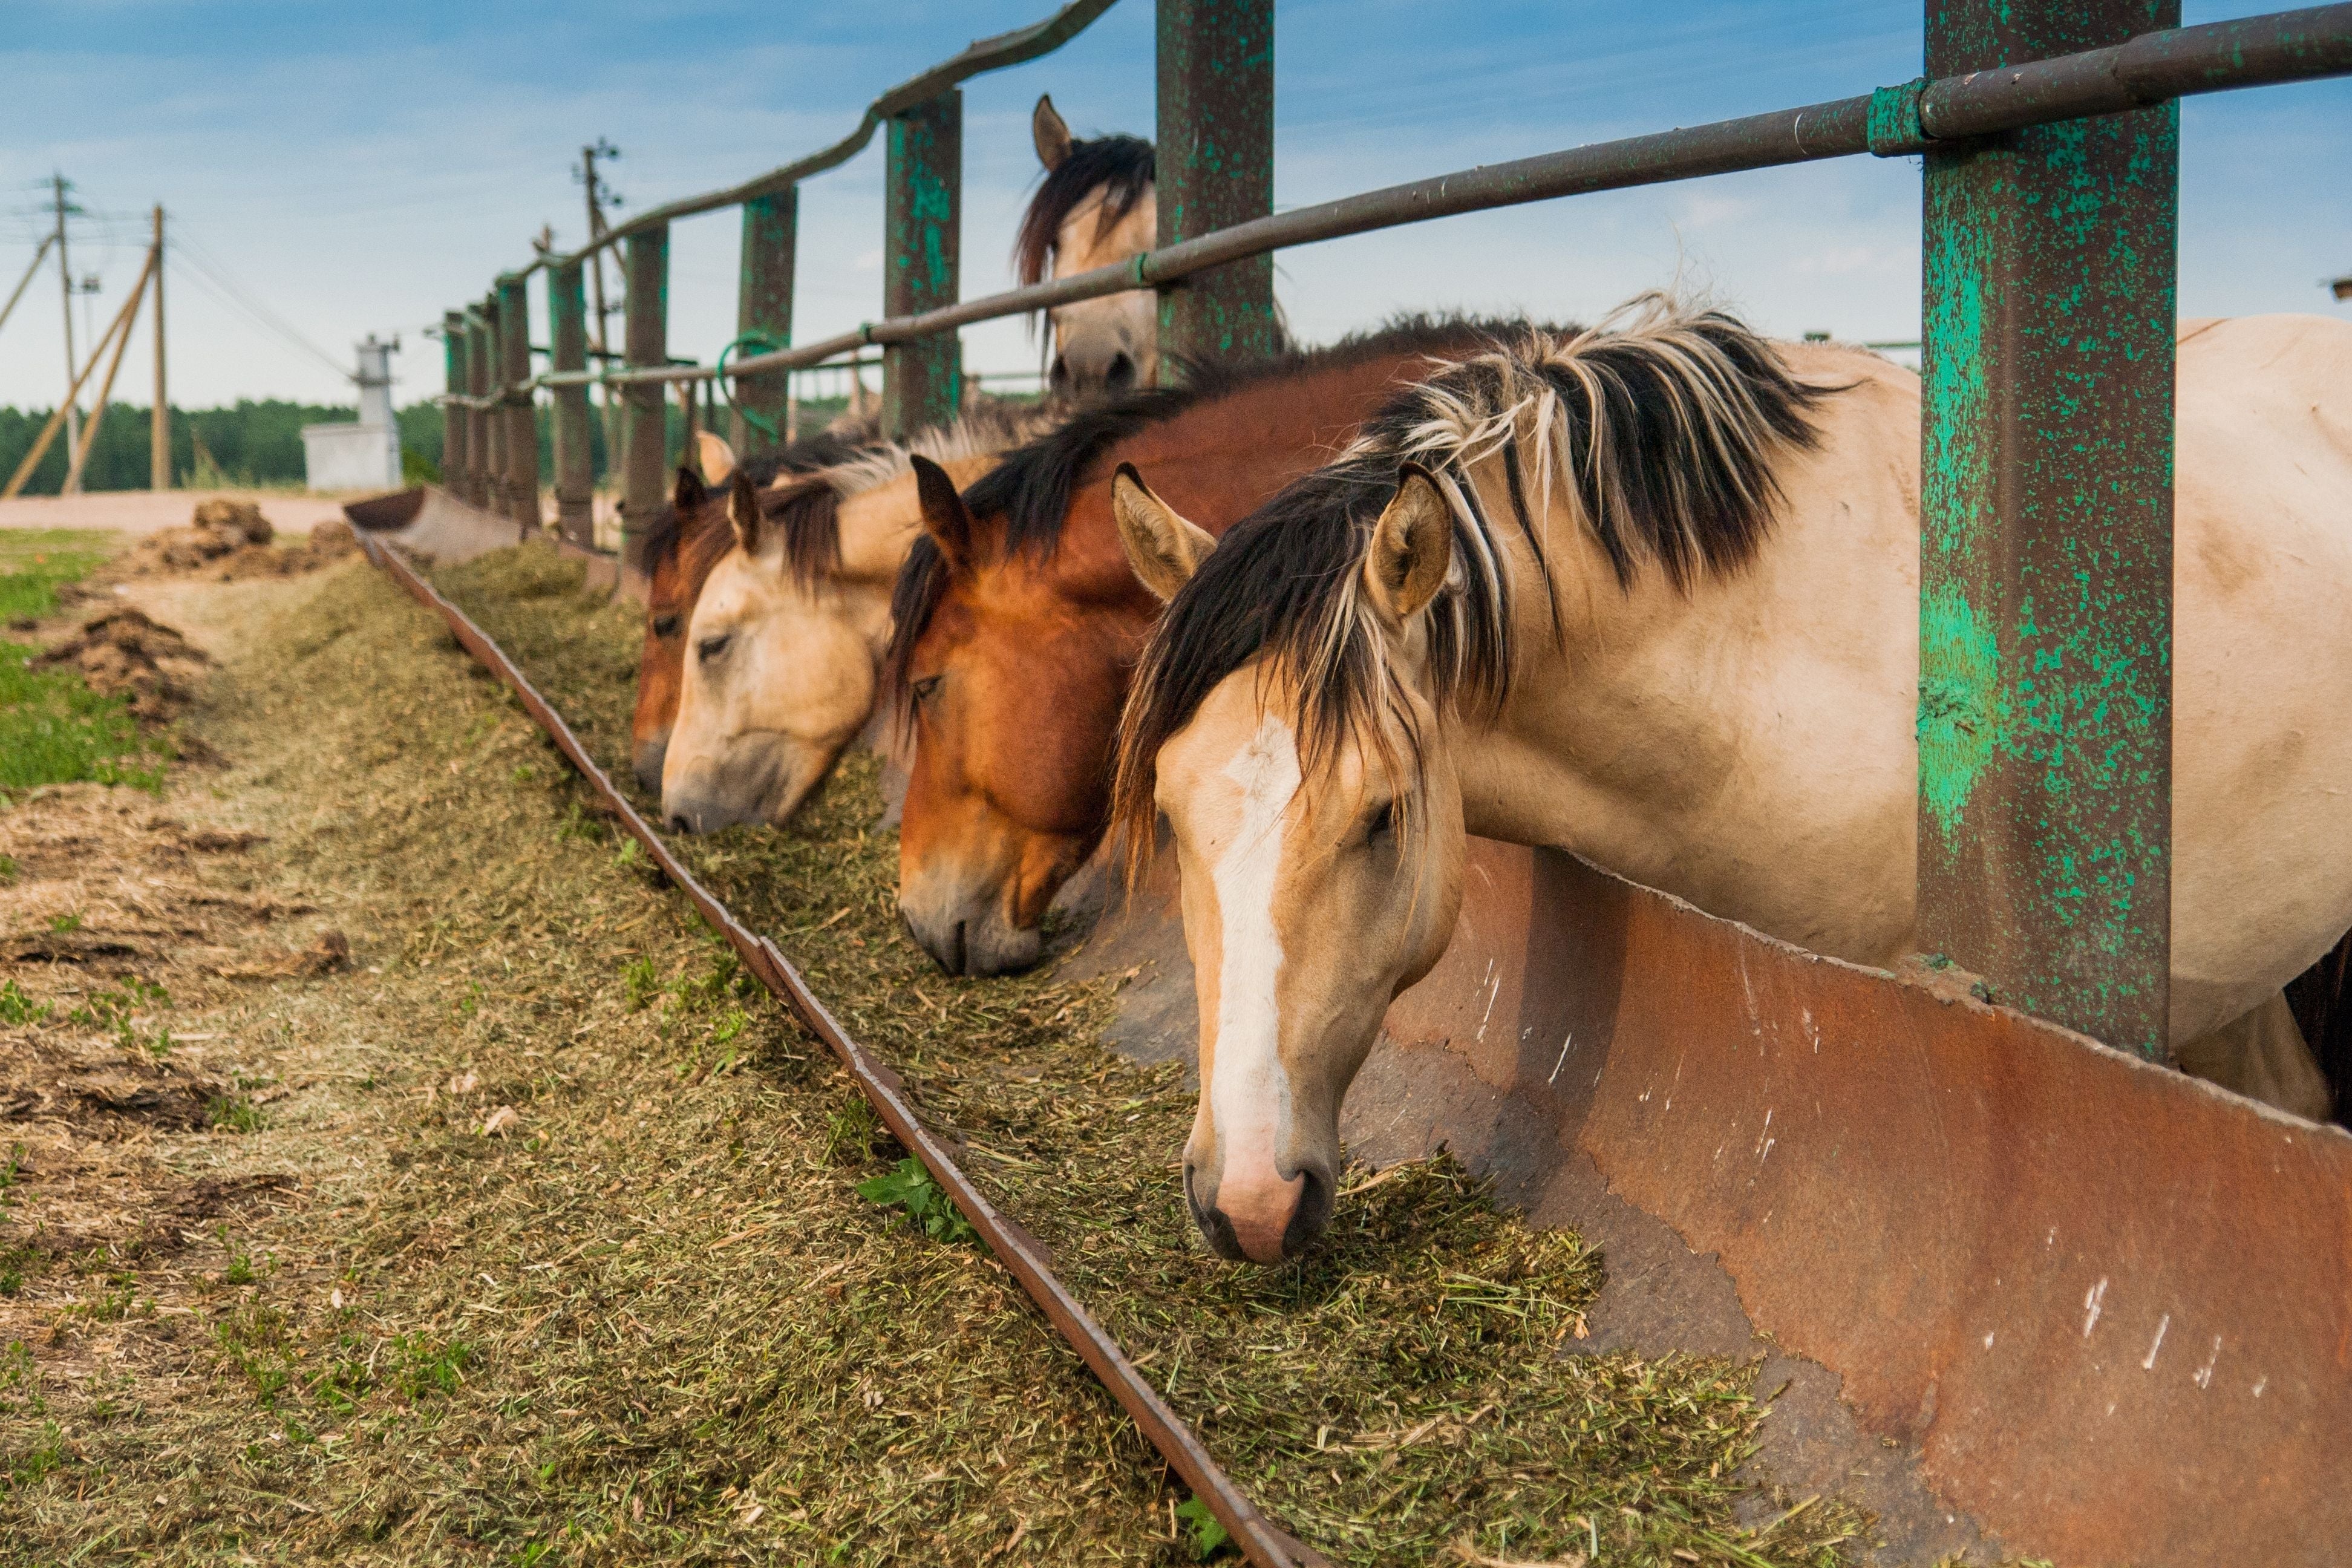 Hemp may make fine food horses, but first federal rules must change